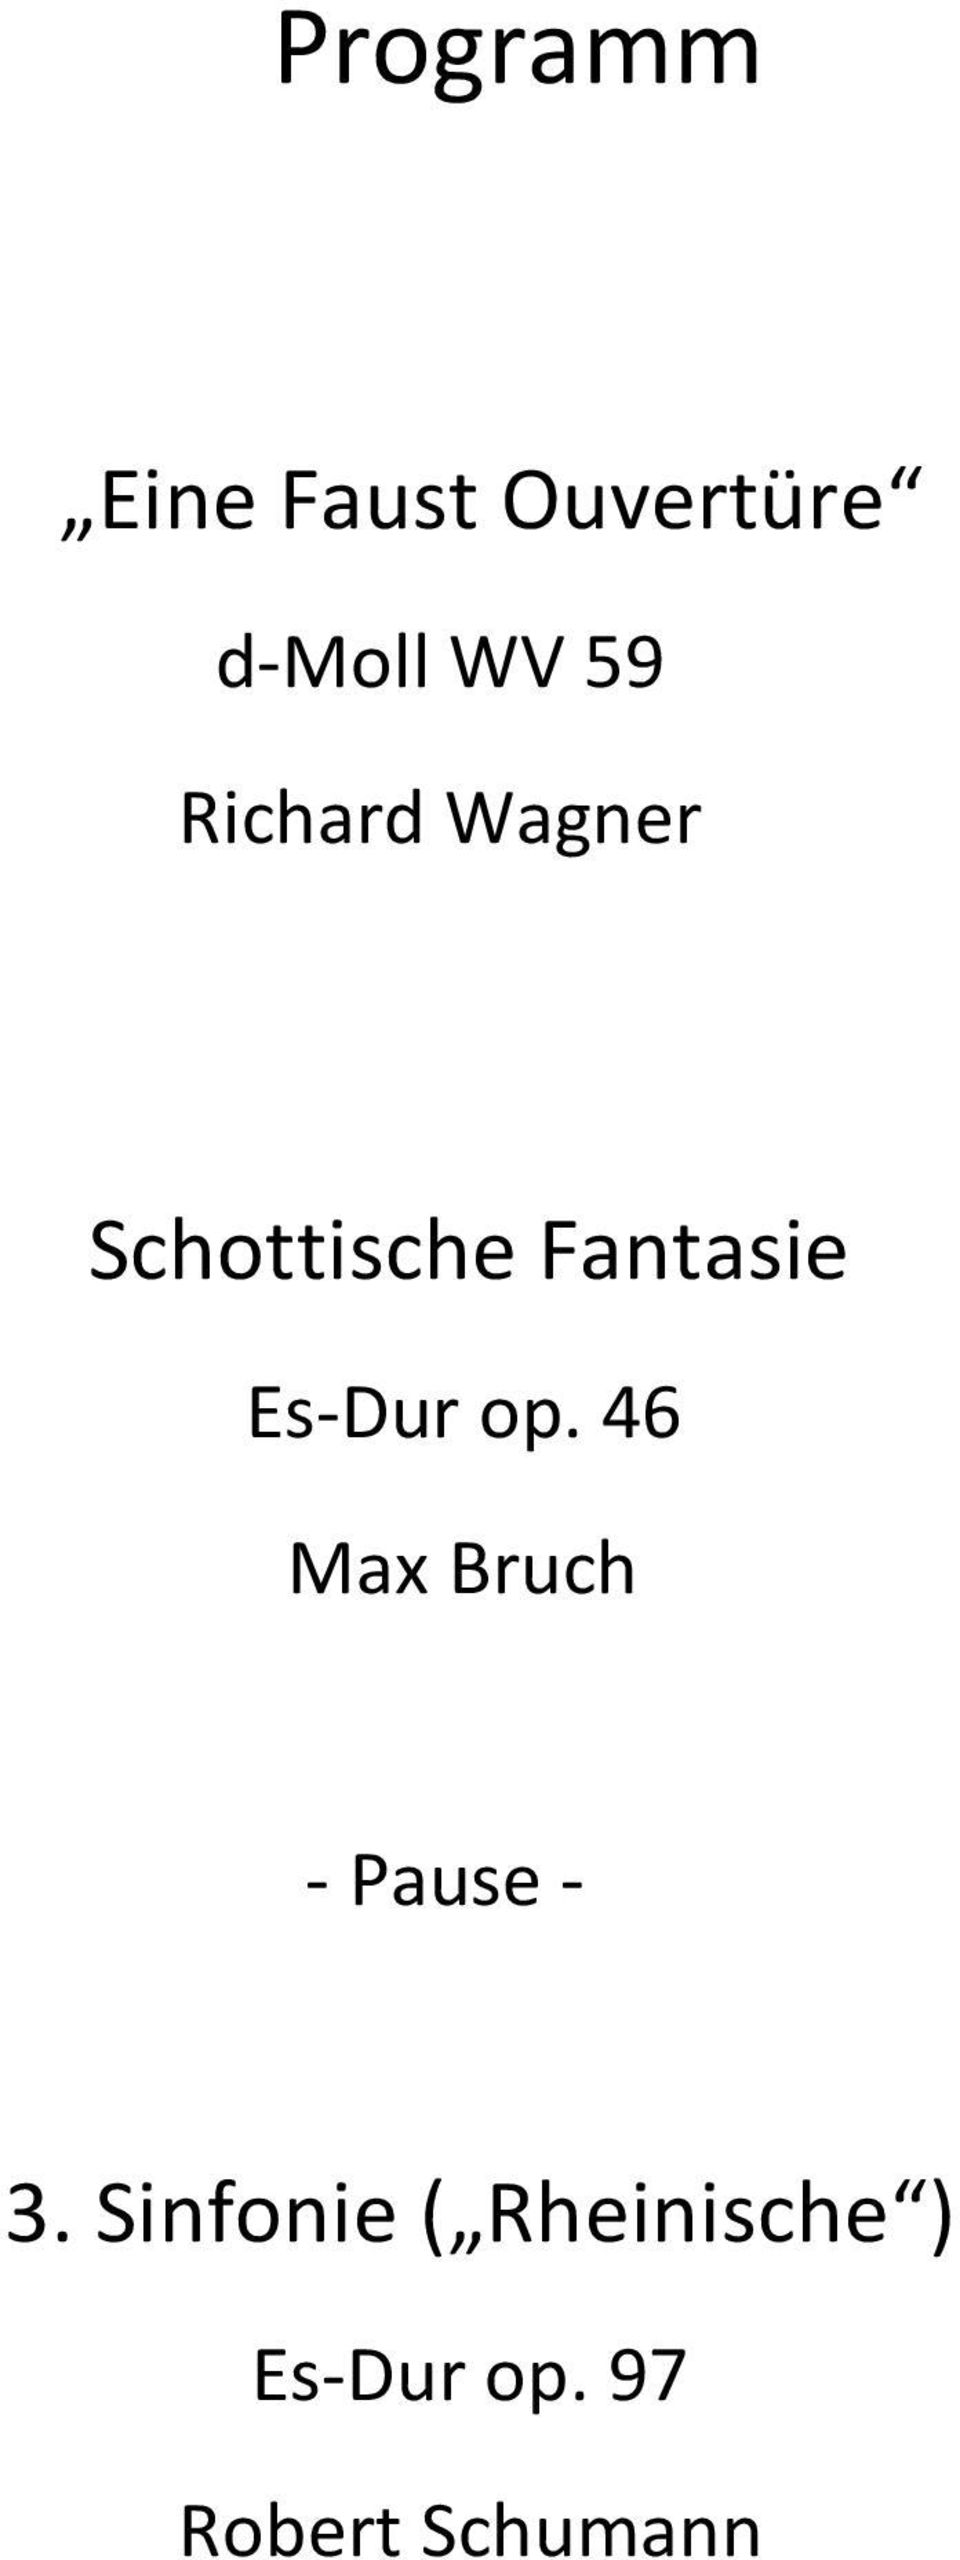 op. 46 Max Bruch - Pause - 3.